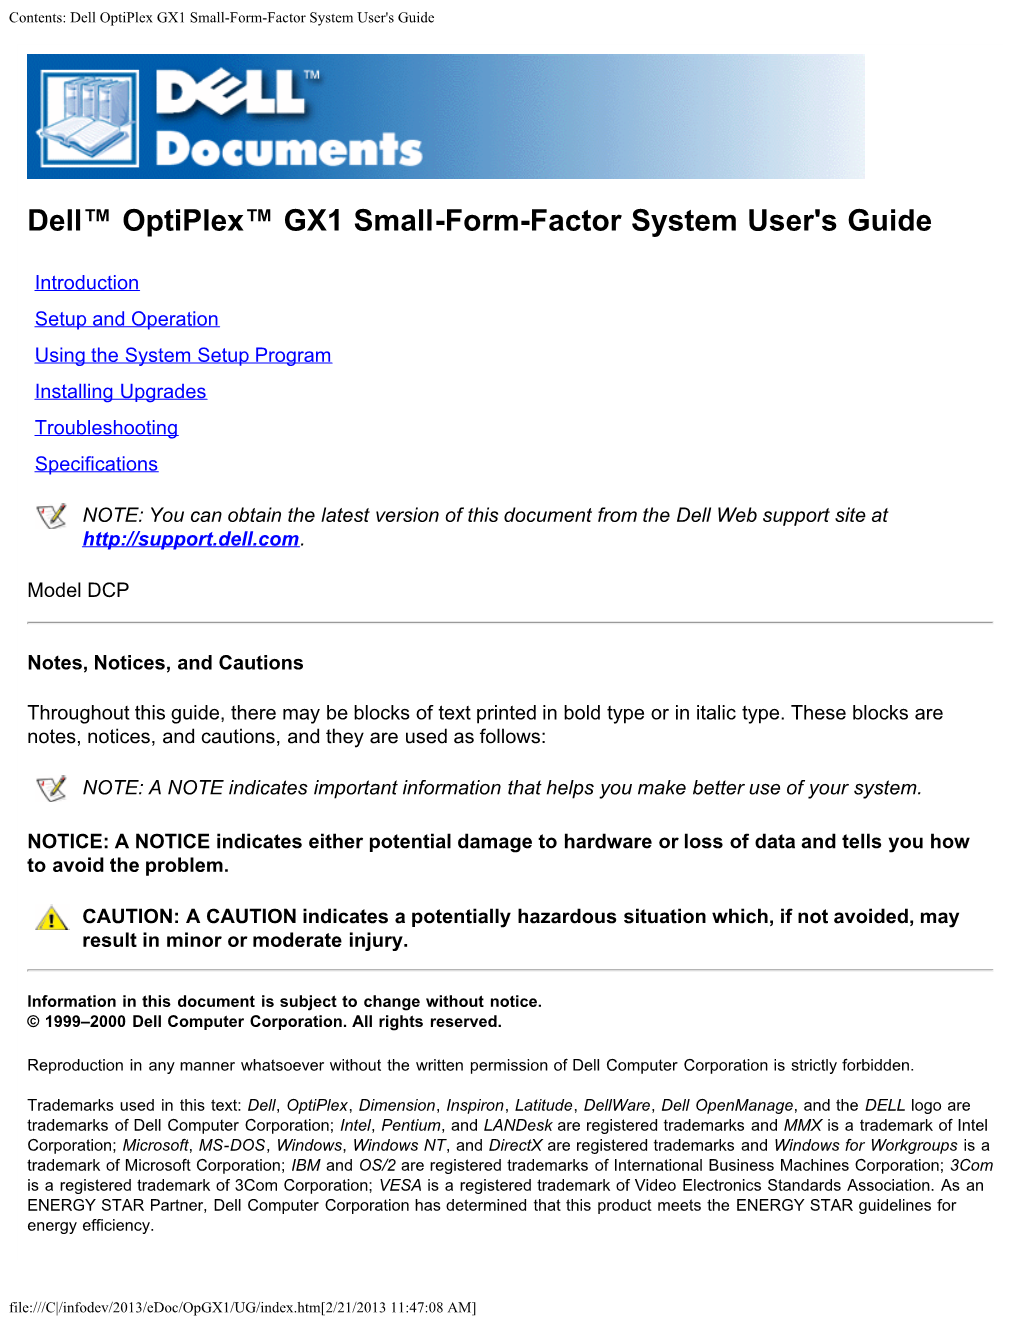 Dell Optiplex GX1 Small-Form-Factor System User's Guide